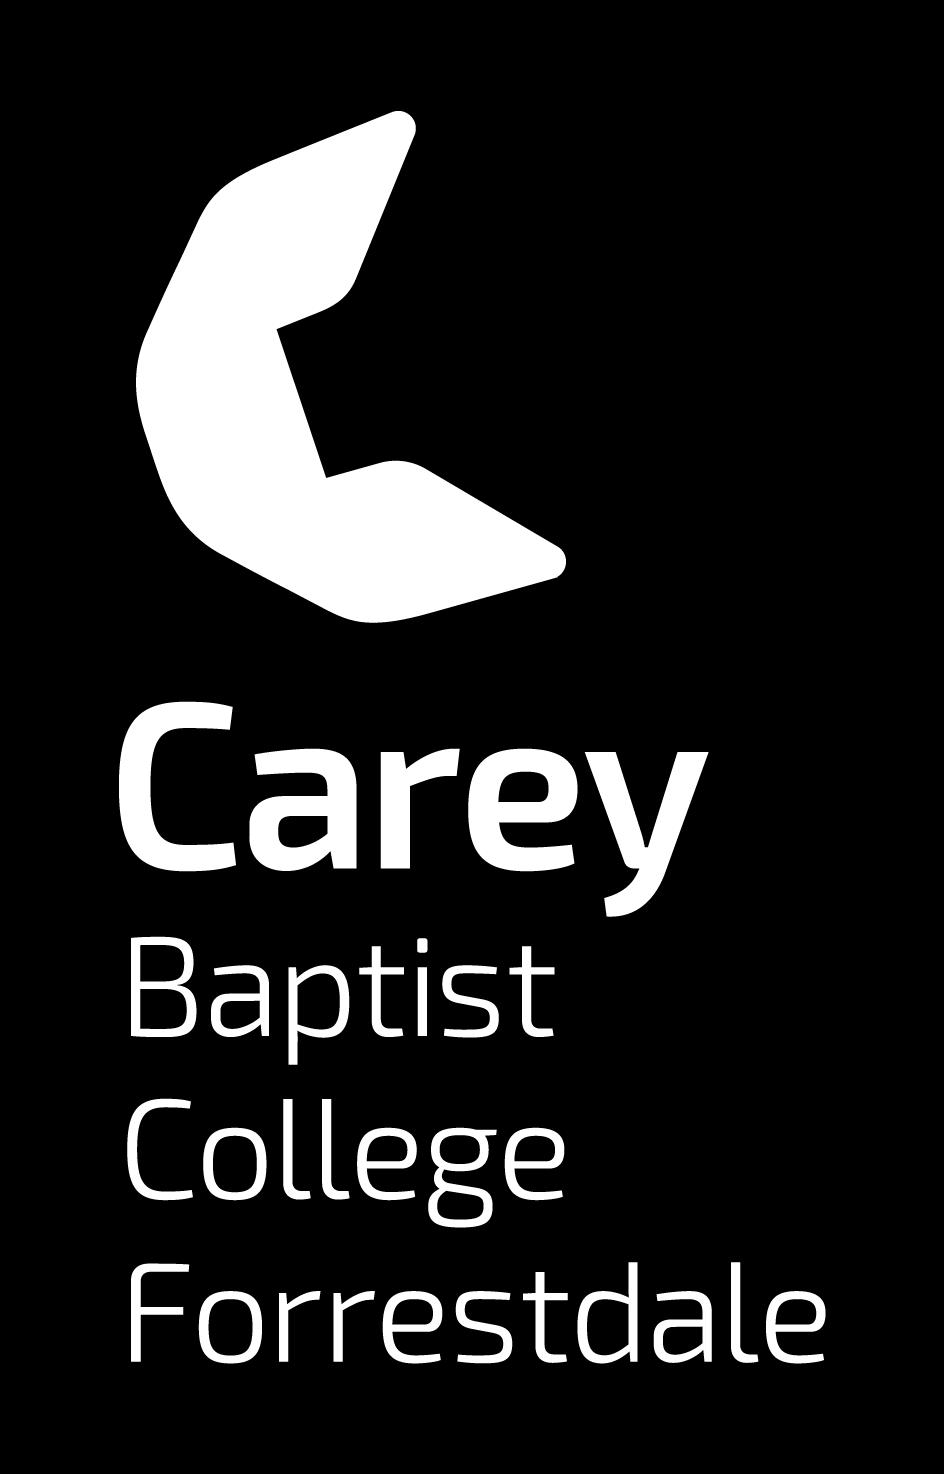 APPLICATION FOR EMPLOYMENT Context Carey Baptist College, Forrestdale has been established by Carey Baptist Church to be a Christian witness to the community.